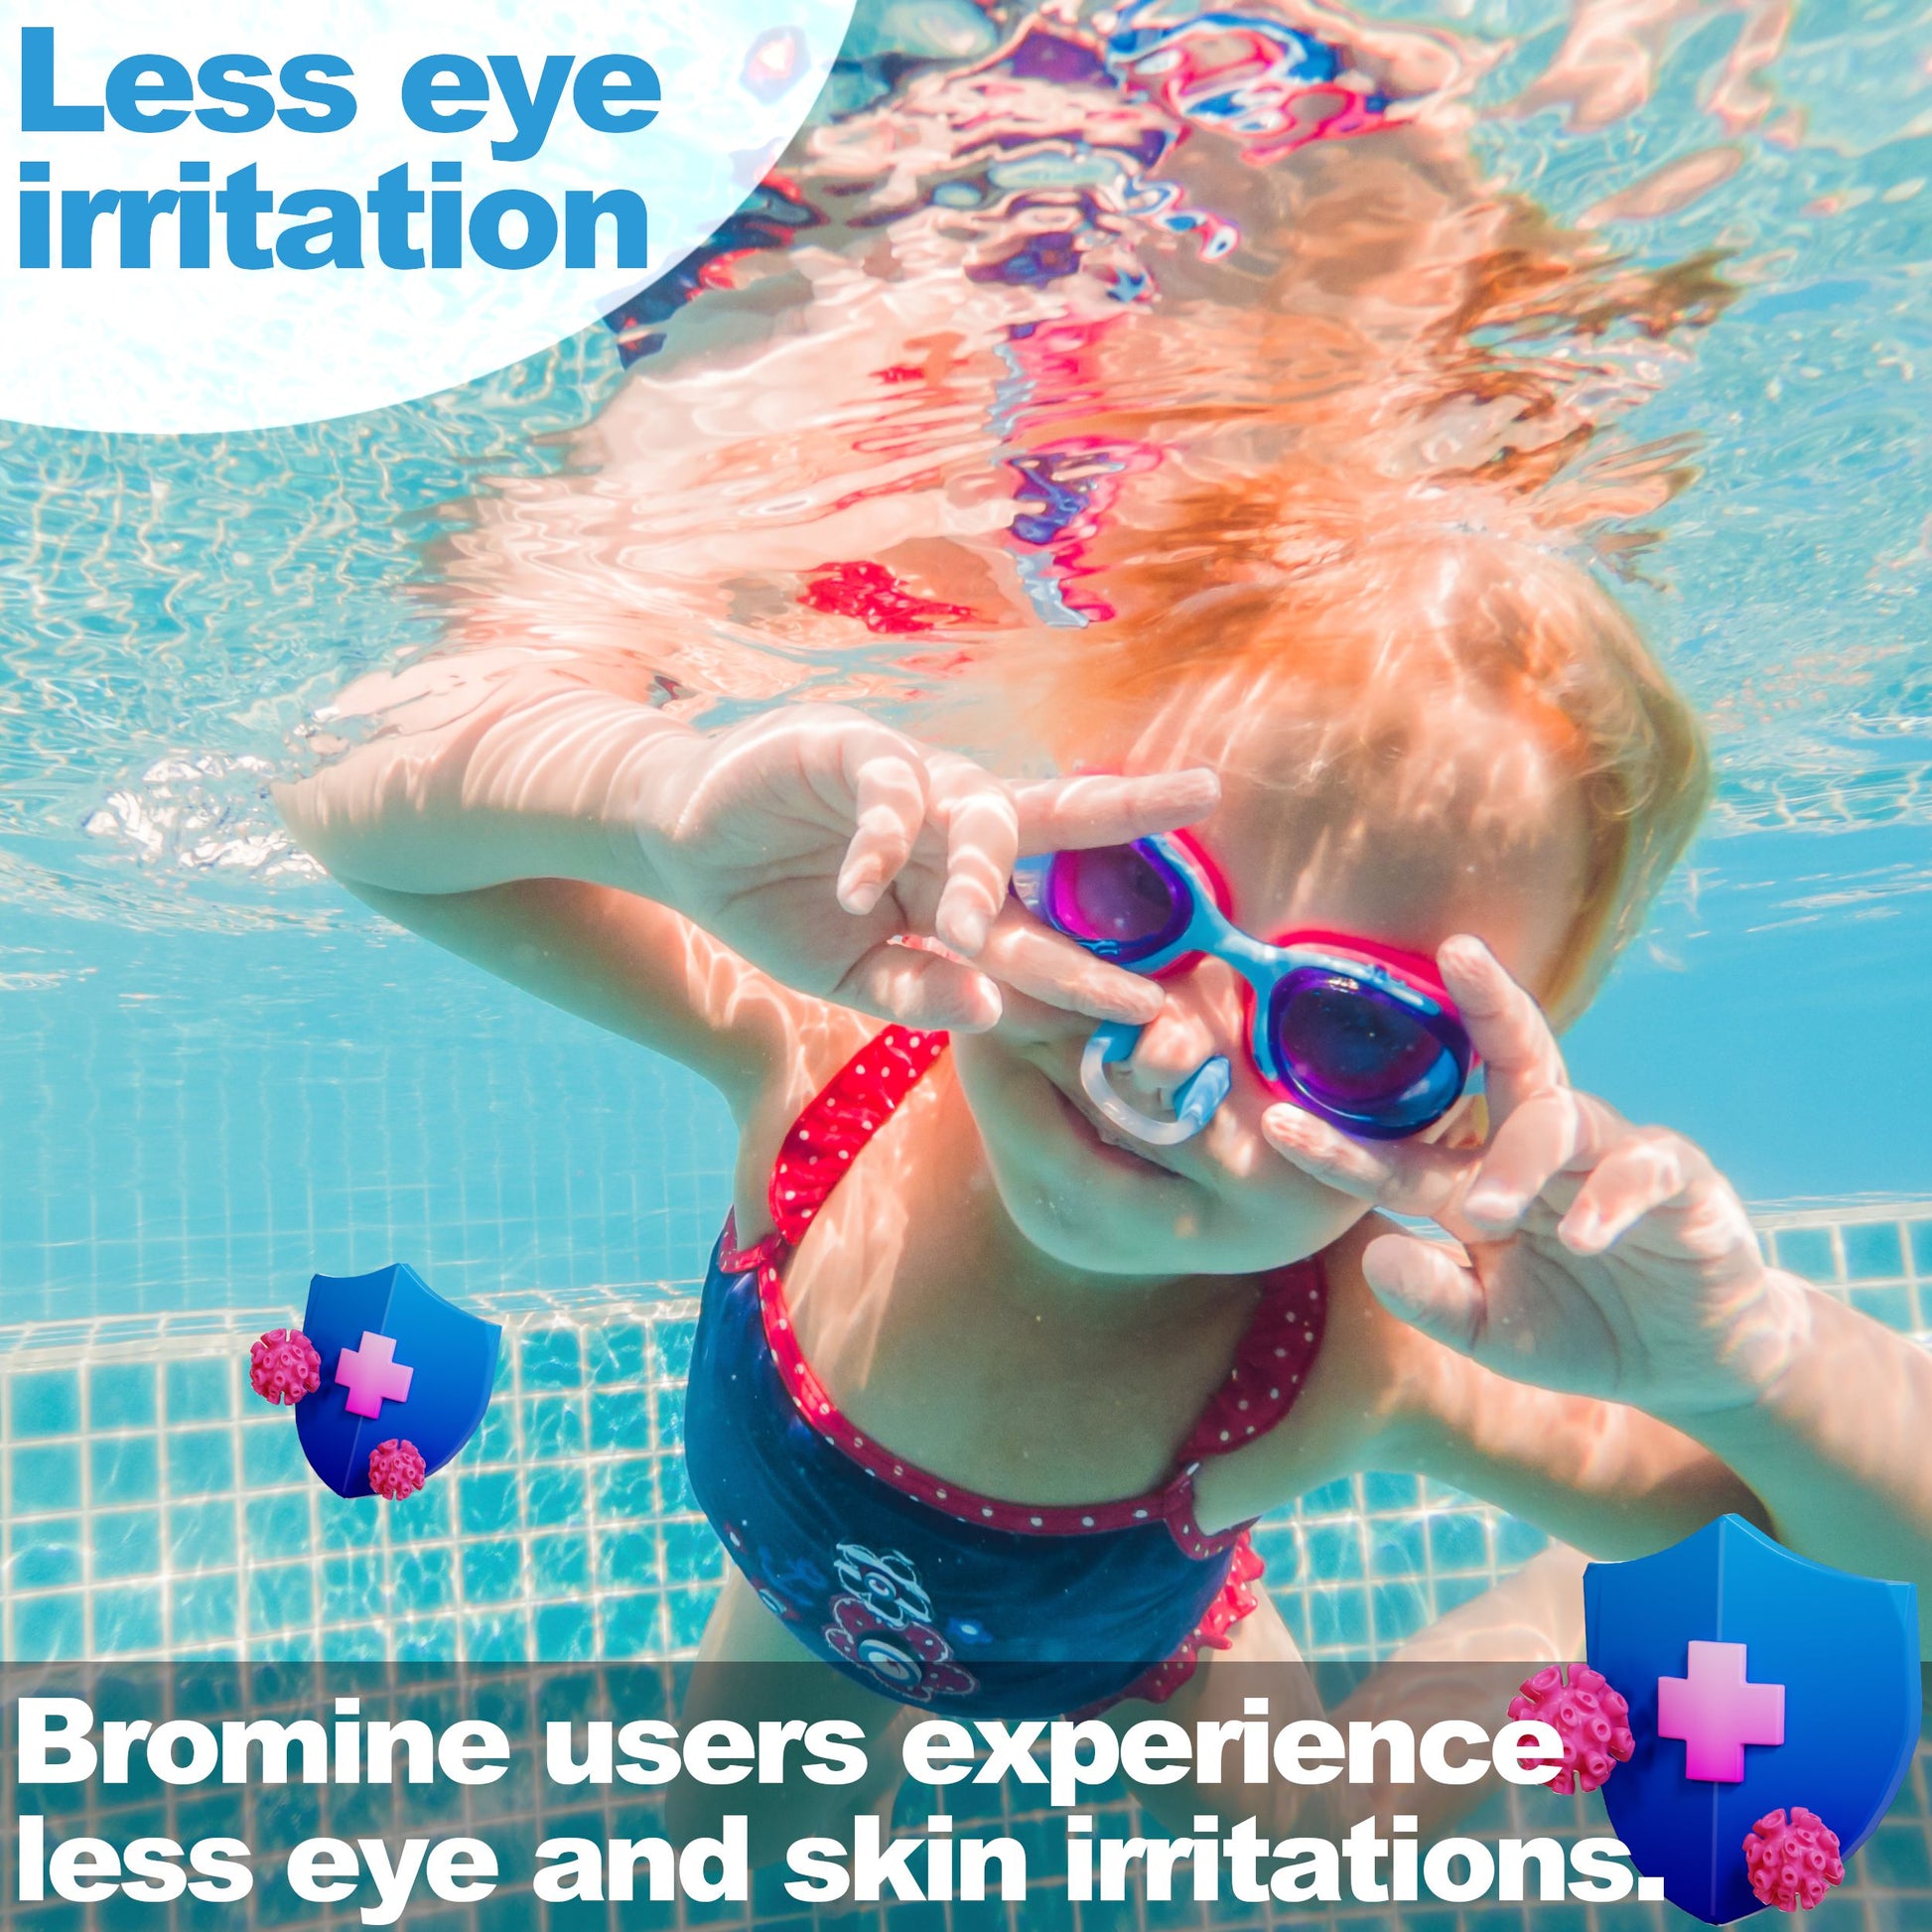 less eye irritation - 10 lbs 1 Inch Bromine Tablets for Hot Tubs Pool Spas